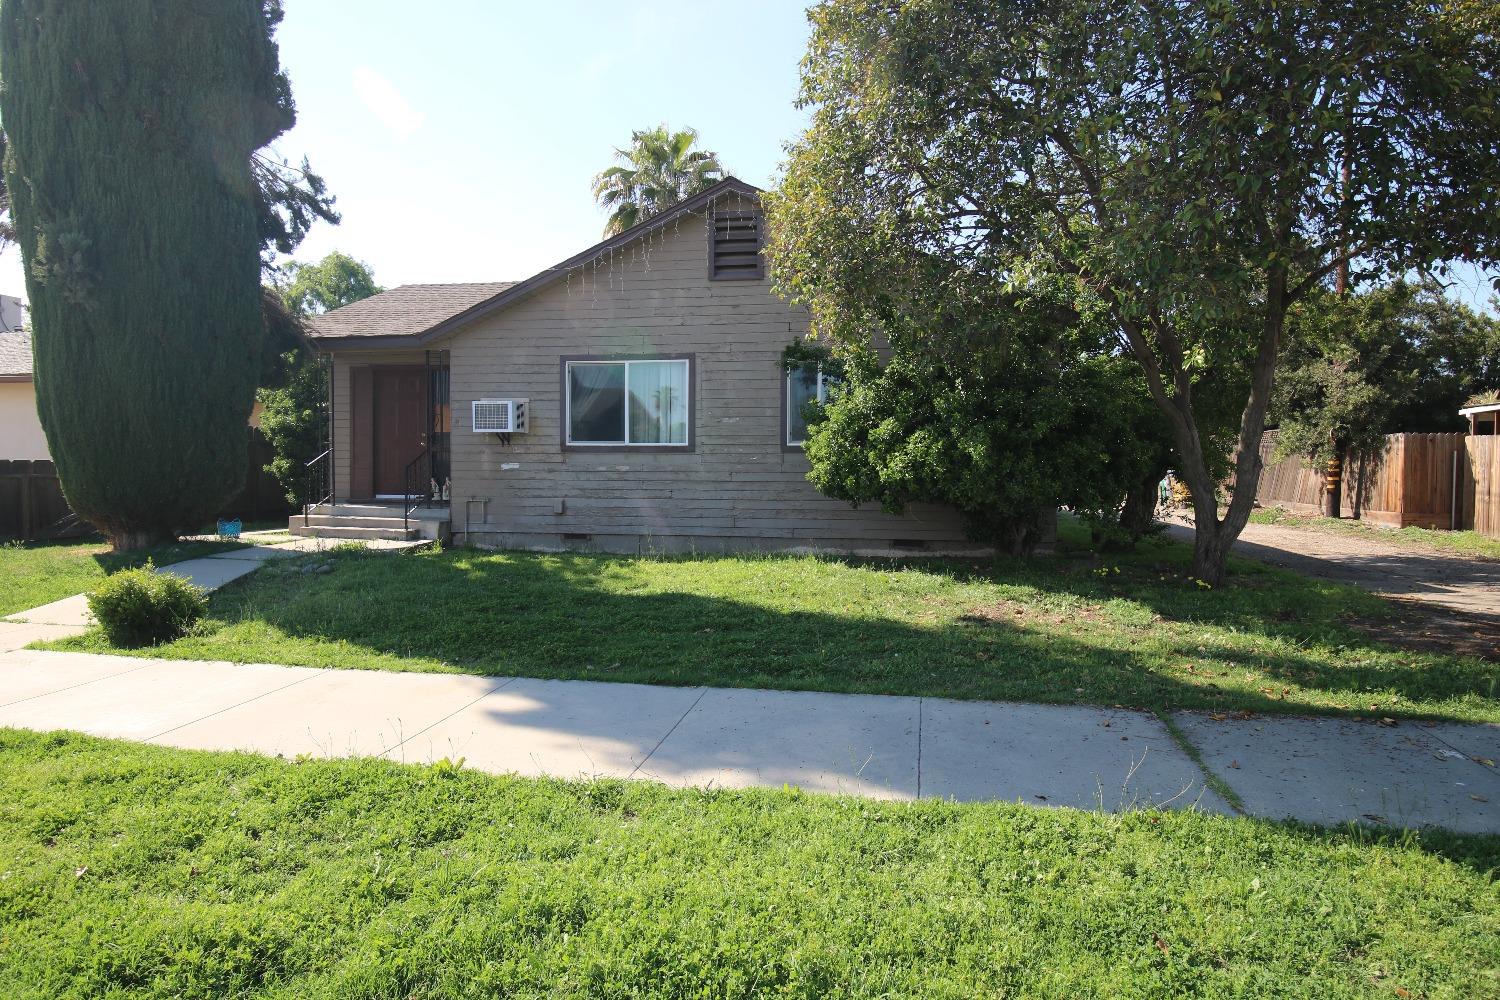 Photo of 2153 11th St in Reedley, CA